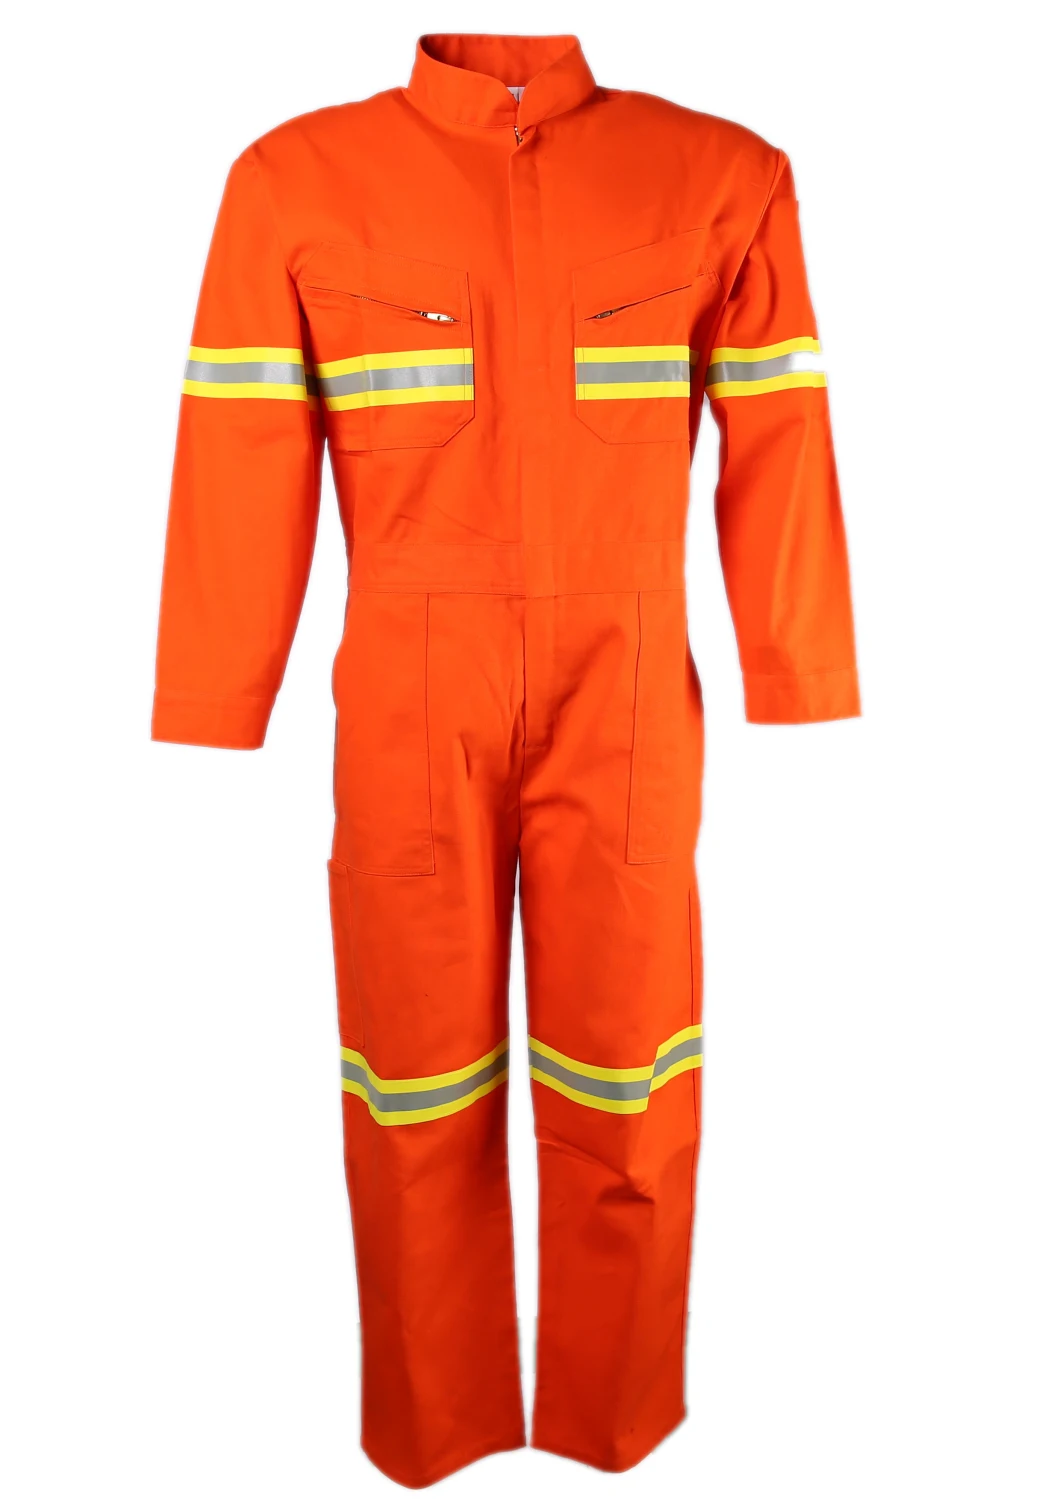 Hi-Vis Yellow 100% Cotton Heat Resistant and Firefighting Fireproof Safety Work Overall Suit